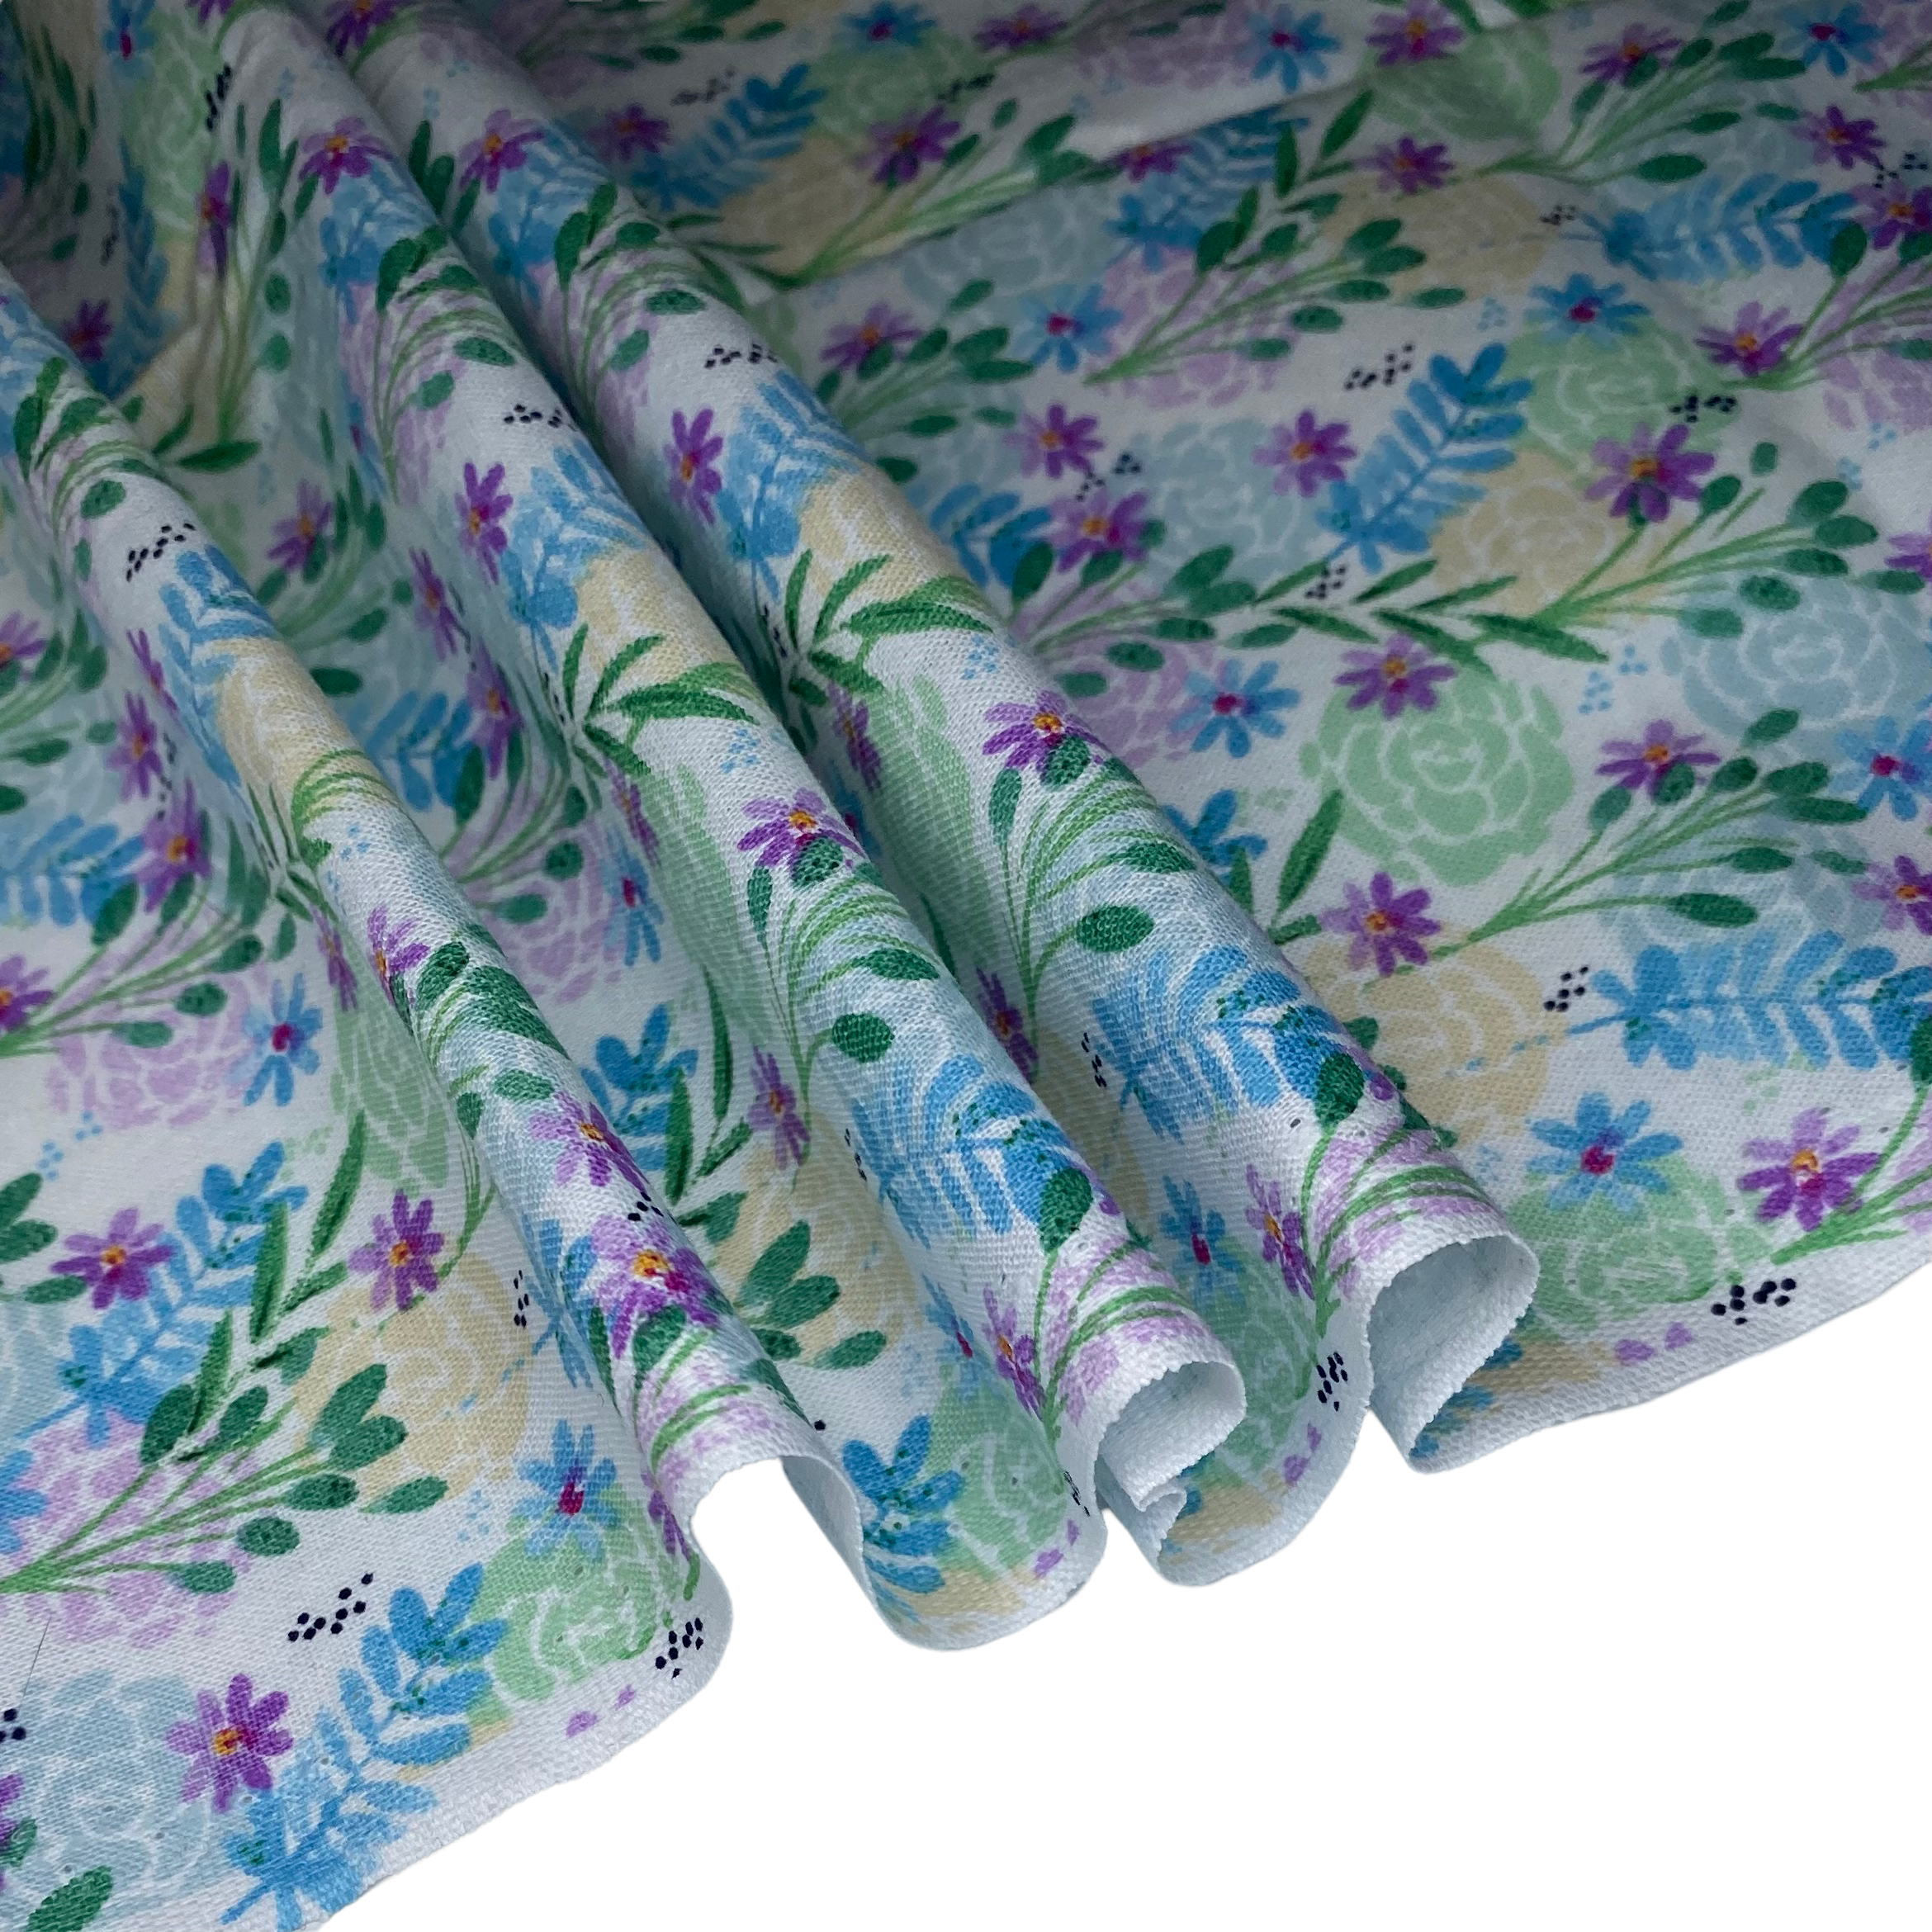 Quilting Cotton - Floral - White/Blue/Purple/Green - Remnant